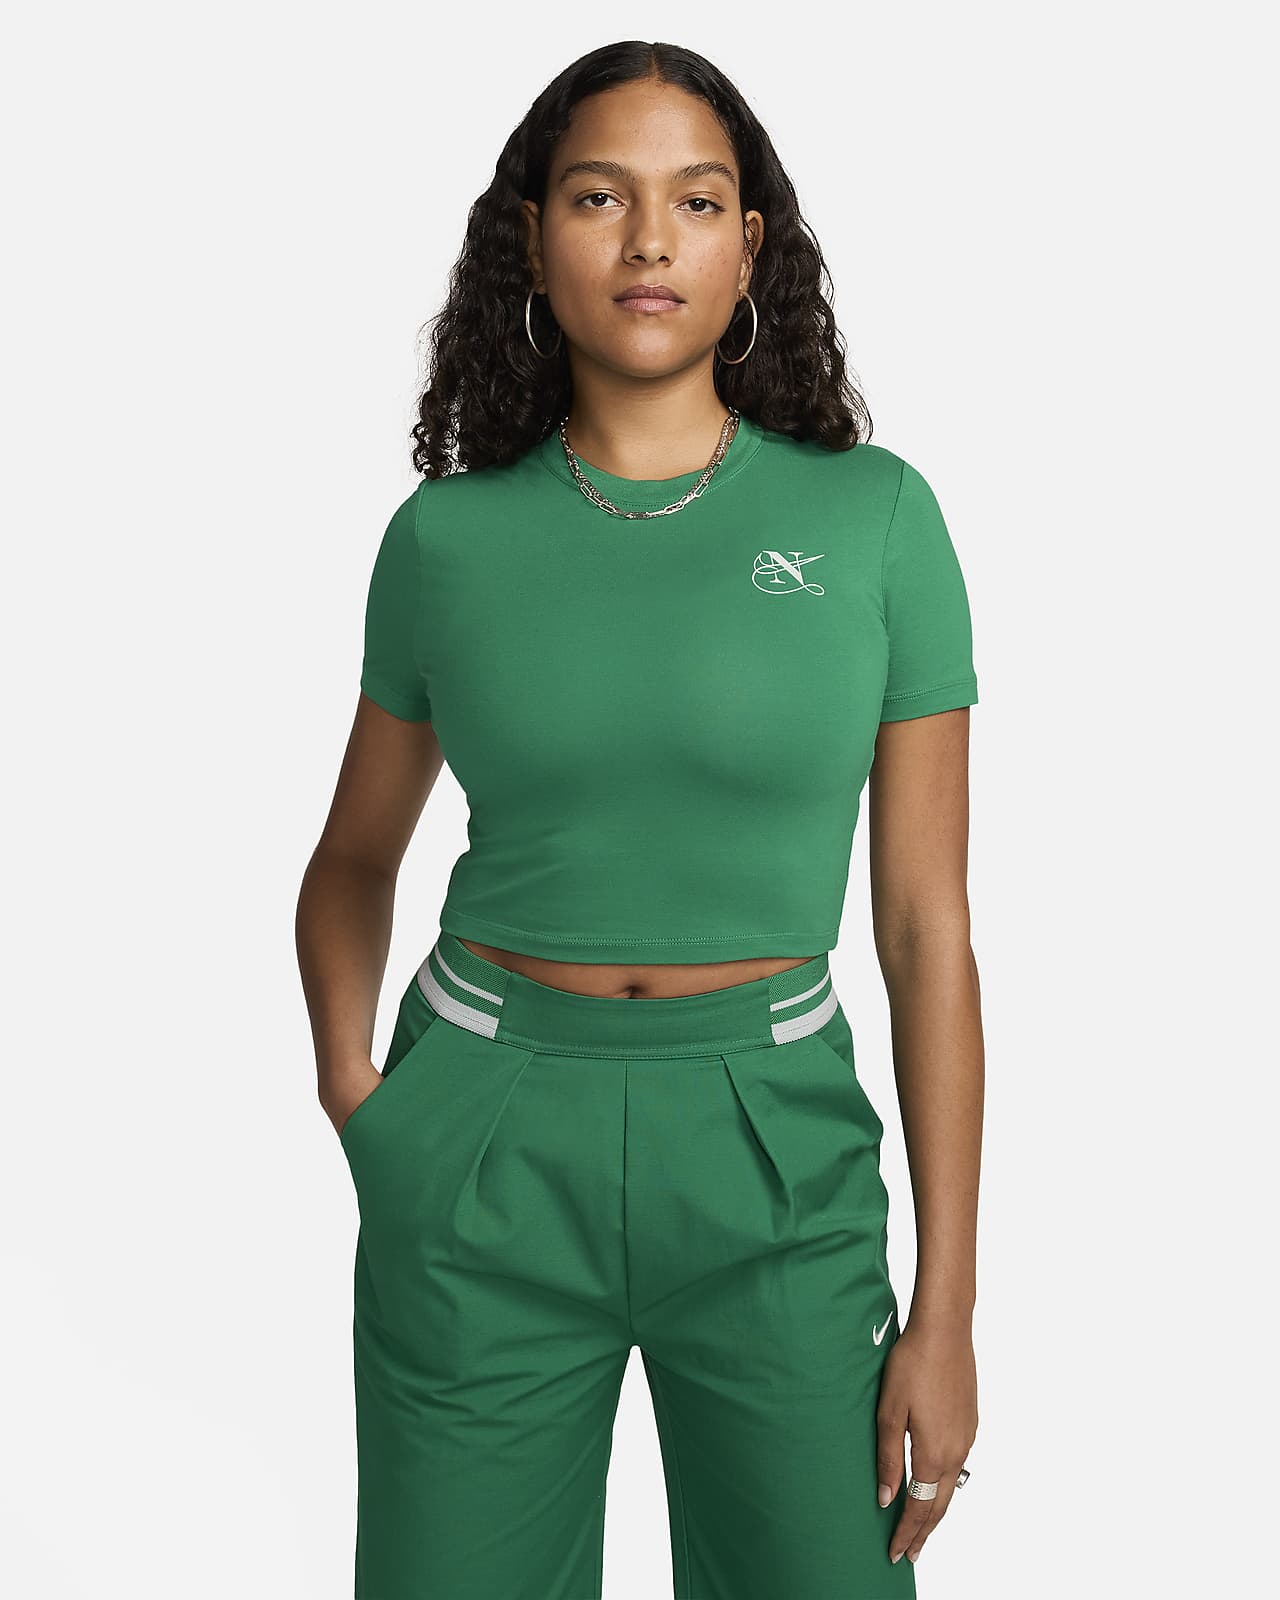 Nike Sportswear Womens Cropped Dance T-Shirt - Women from excell